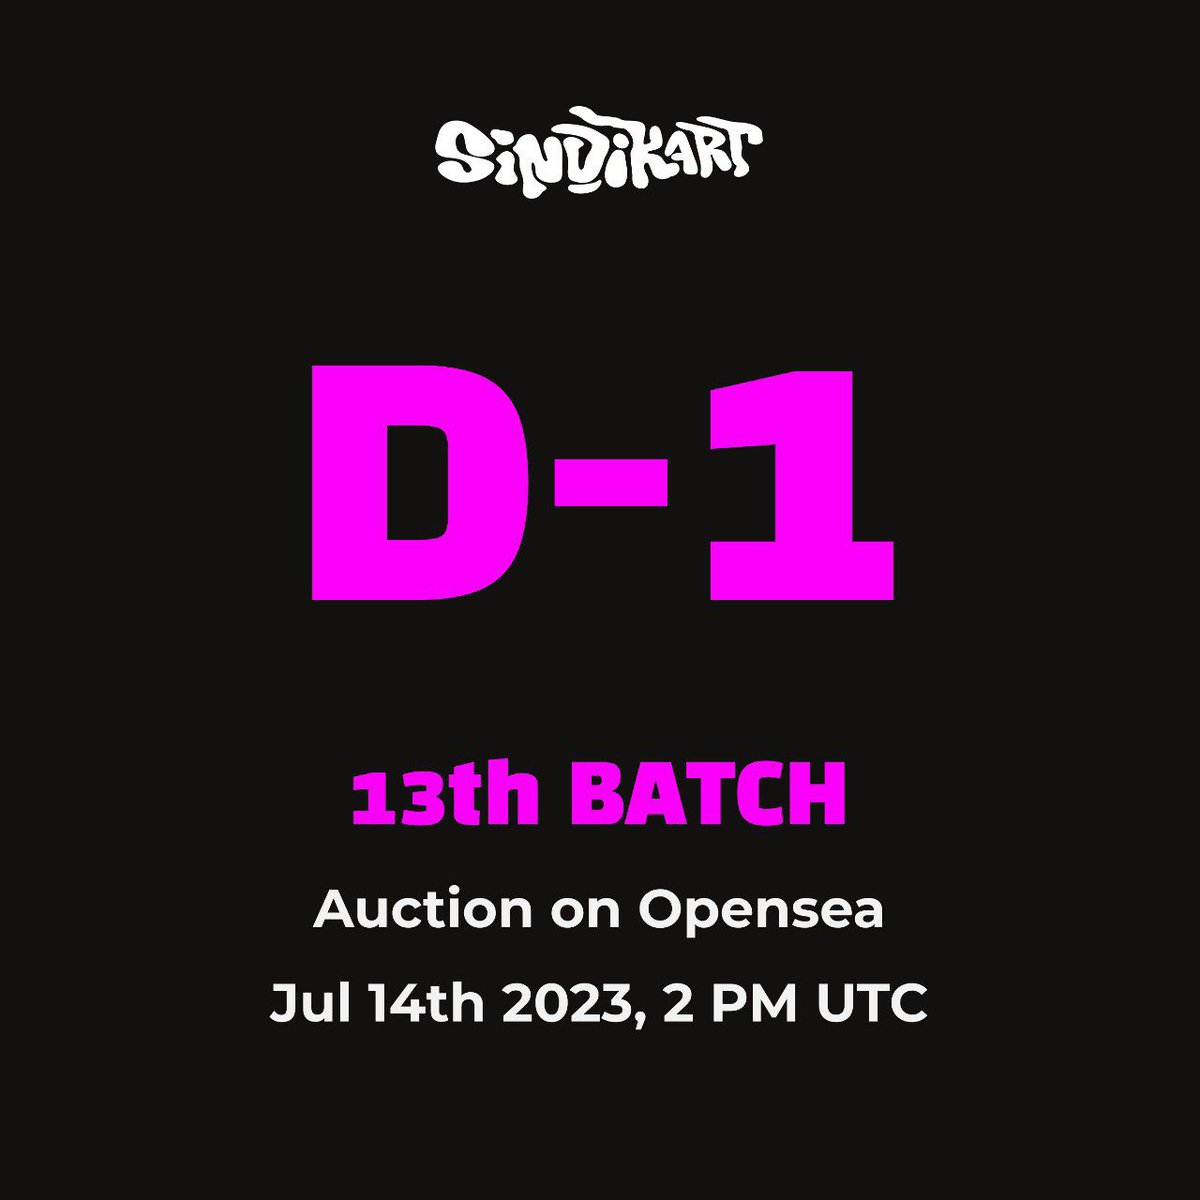 That’s all! So only 1 day left before the auction, prepare yourself! #sindikart